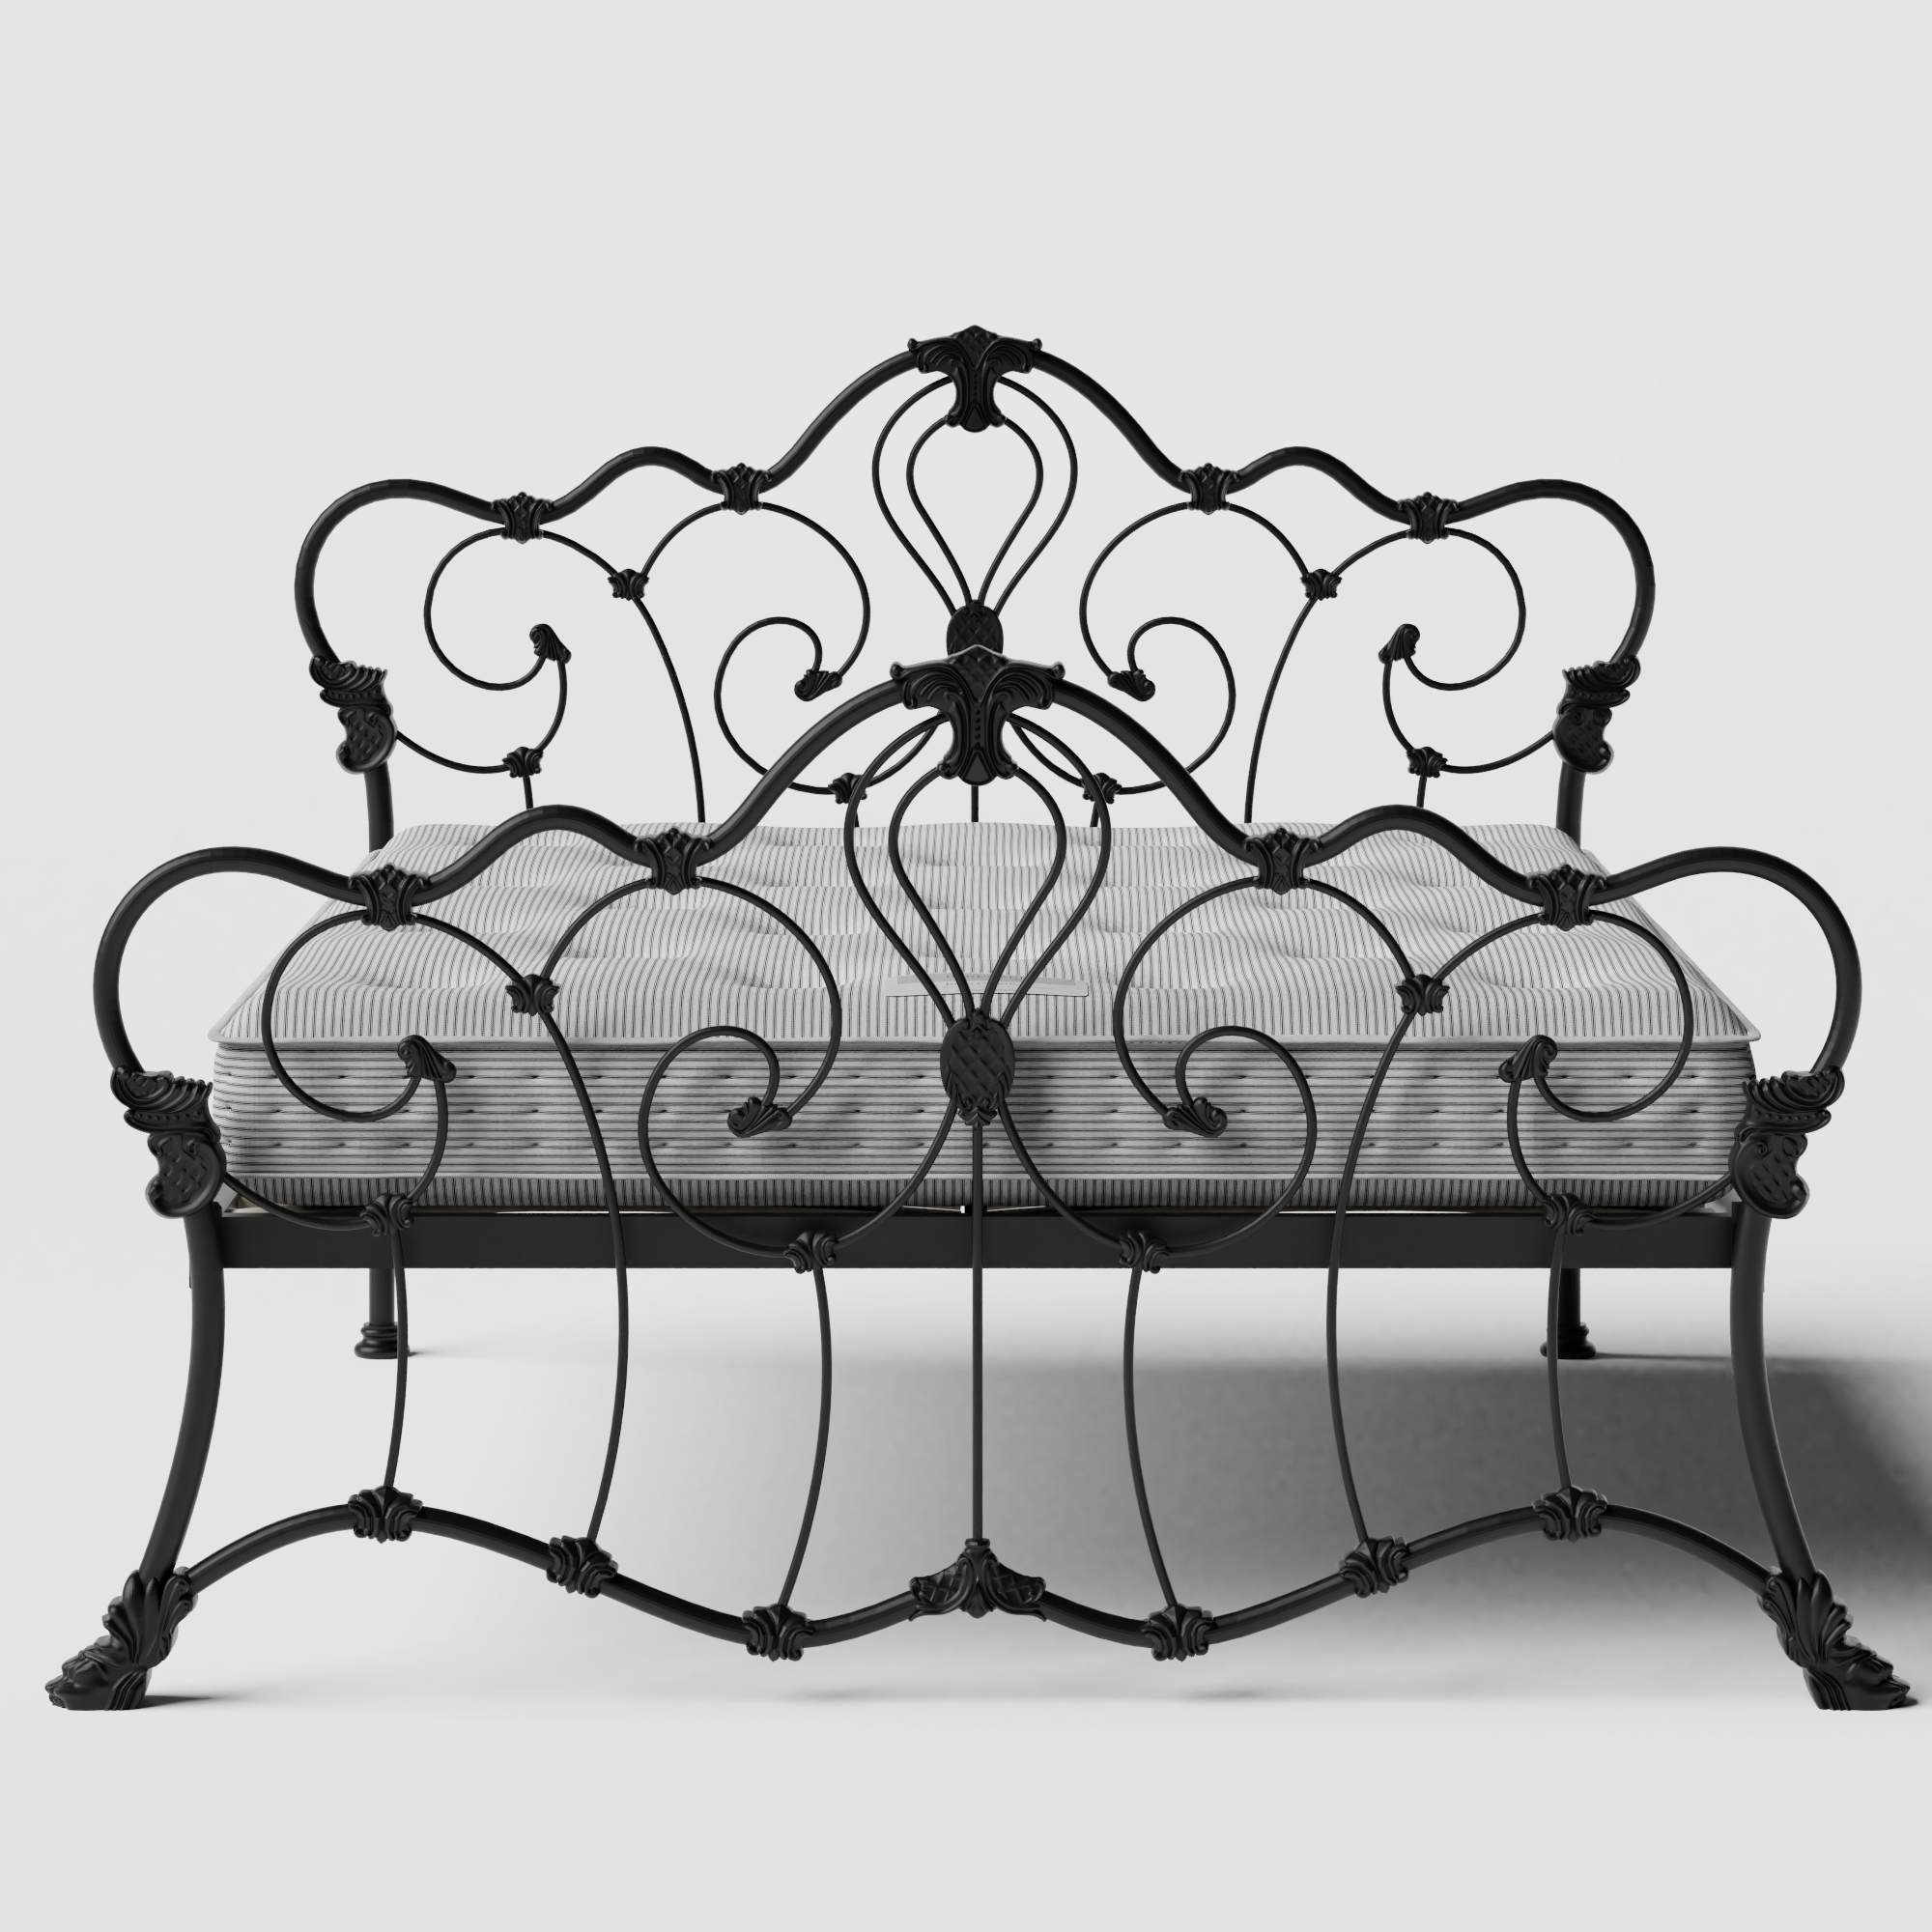 Athalone iron/metal bed in black with Juno mattress